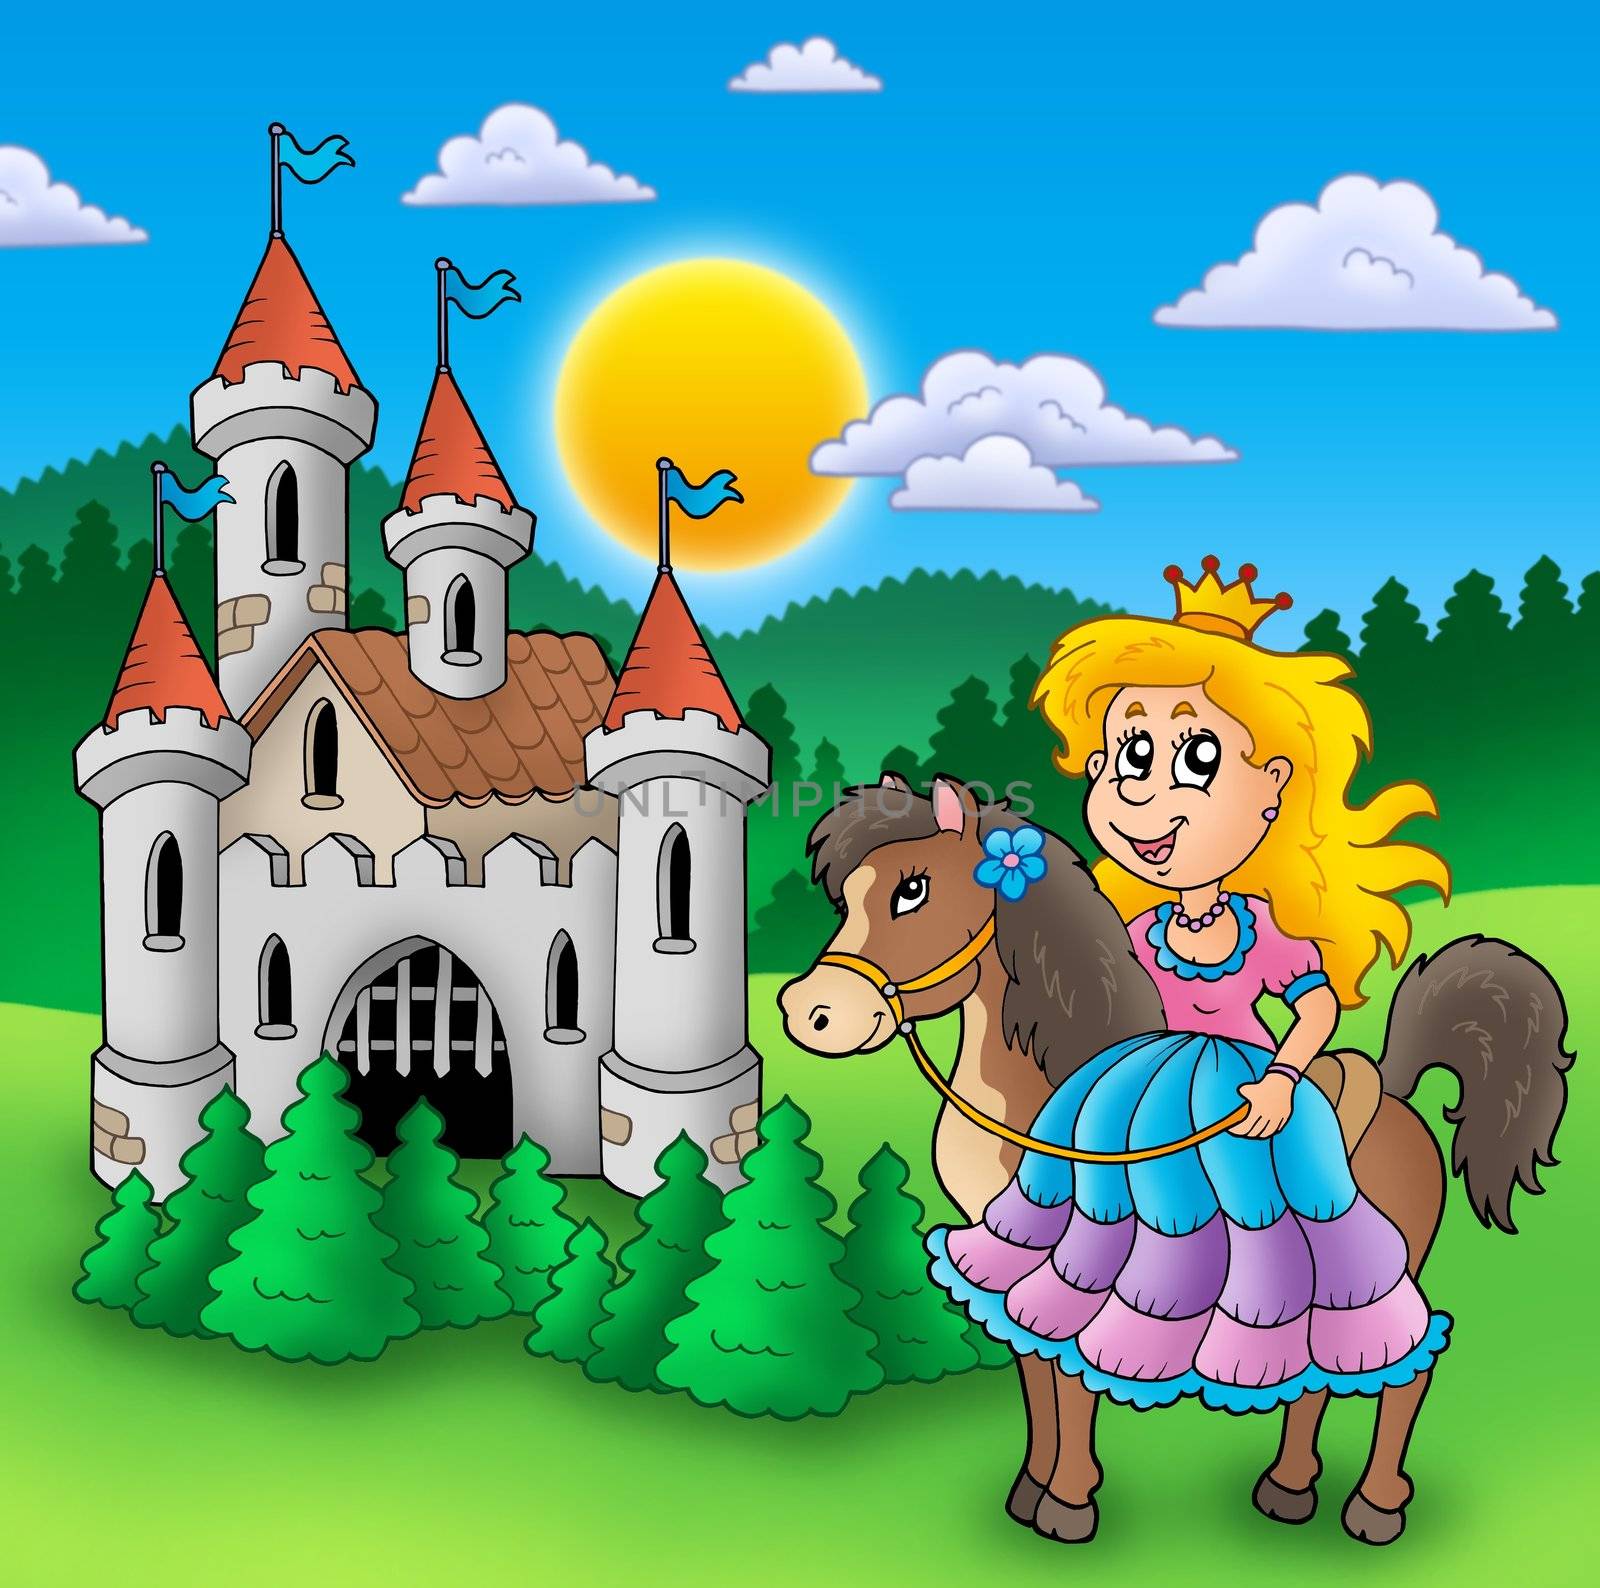 Princess on horse with old castle by clairev